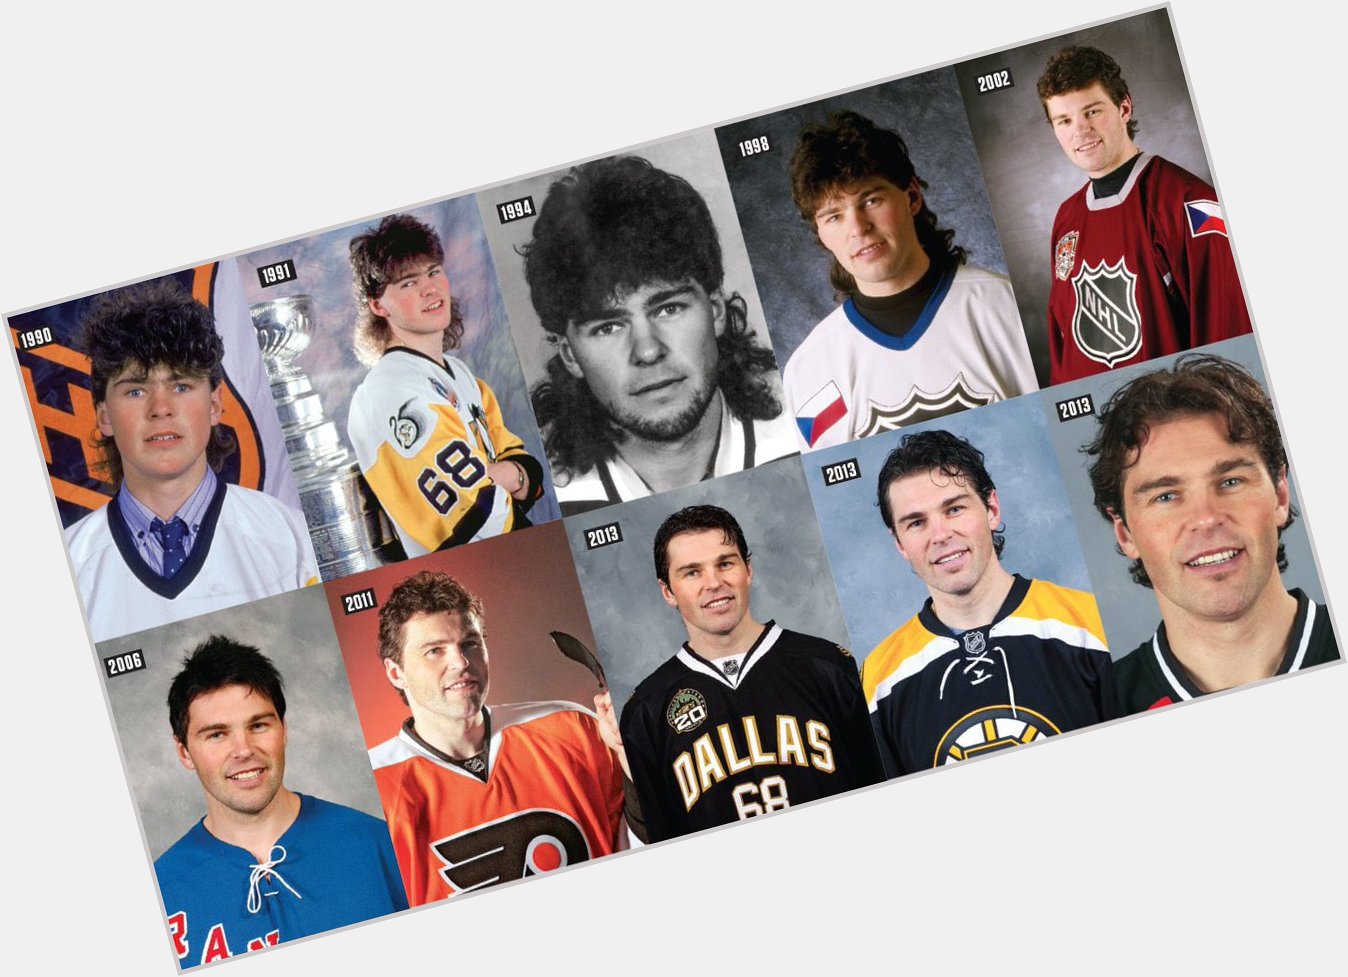 Happy 50th birthday to Jaromir Jagr! Still playing the sport he loves and still a beast. 